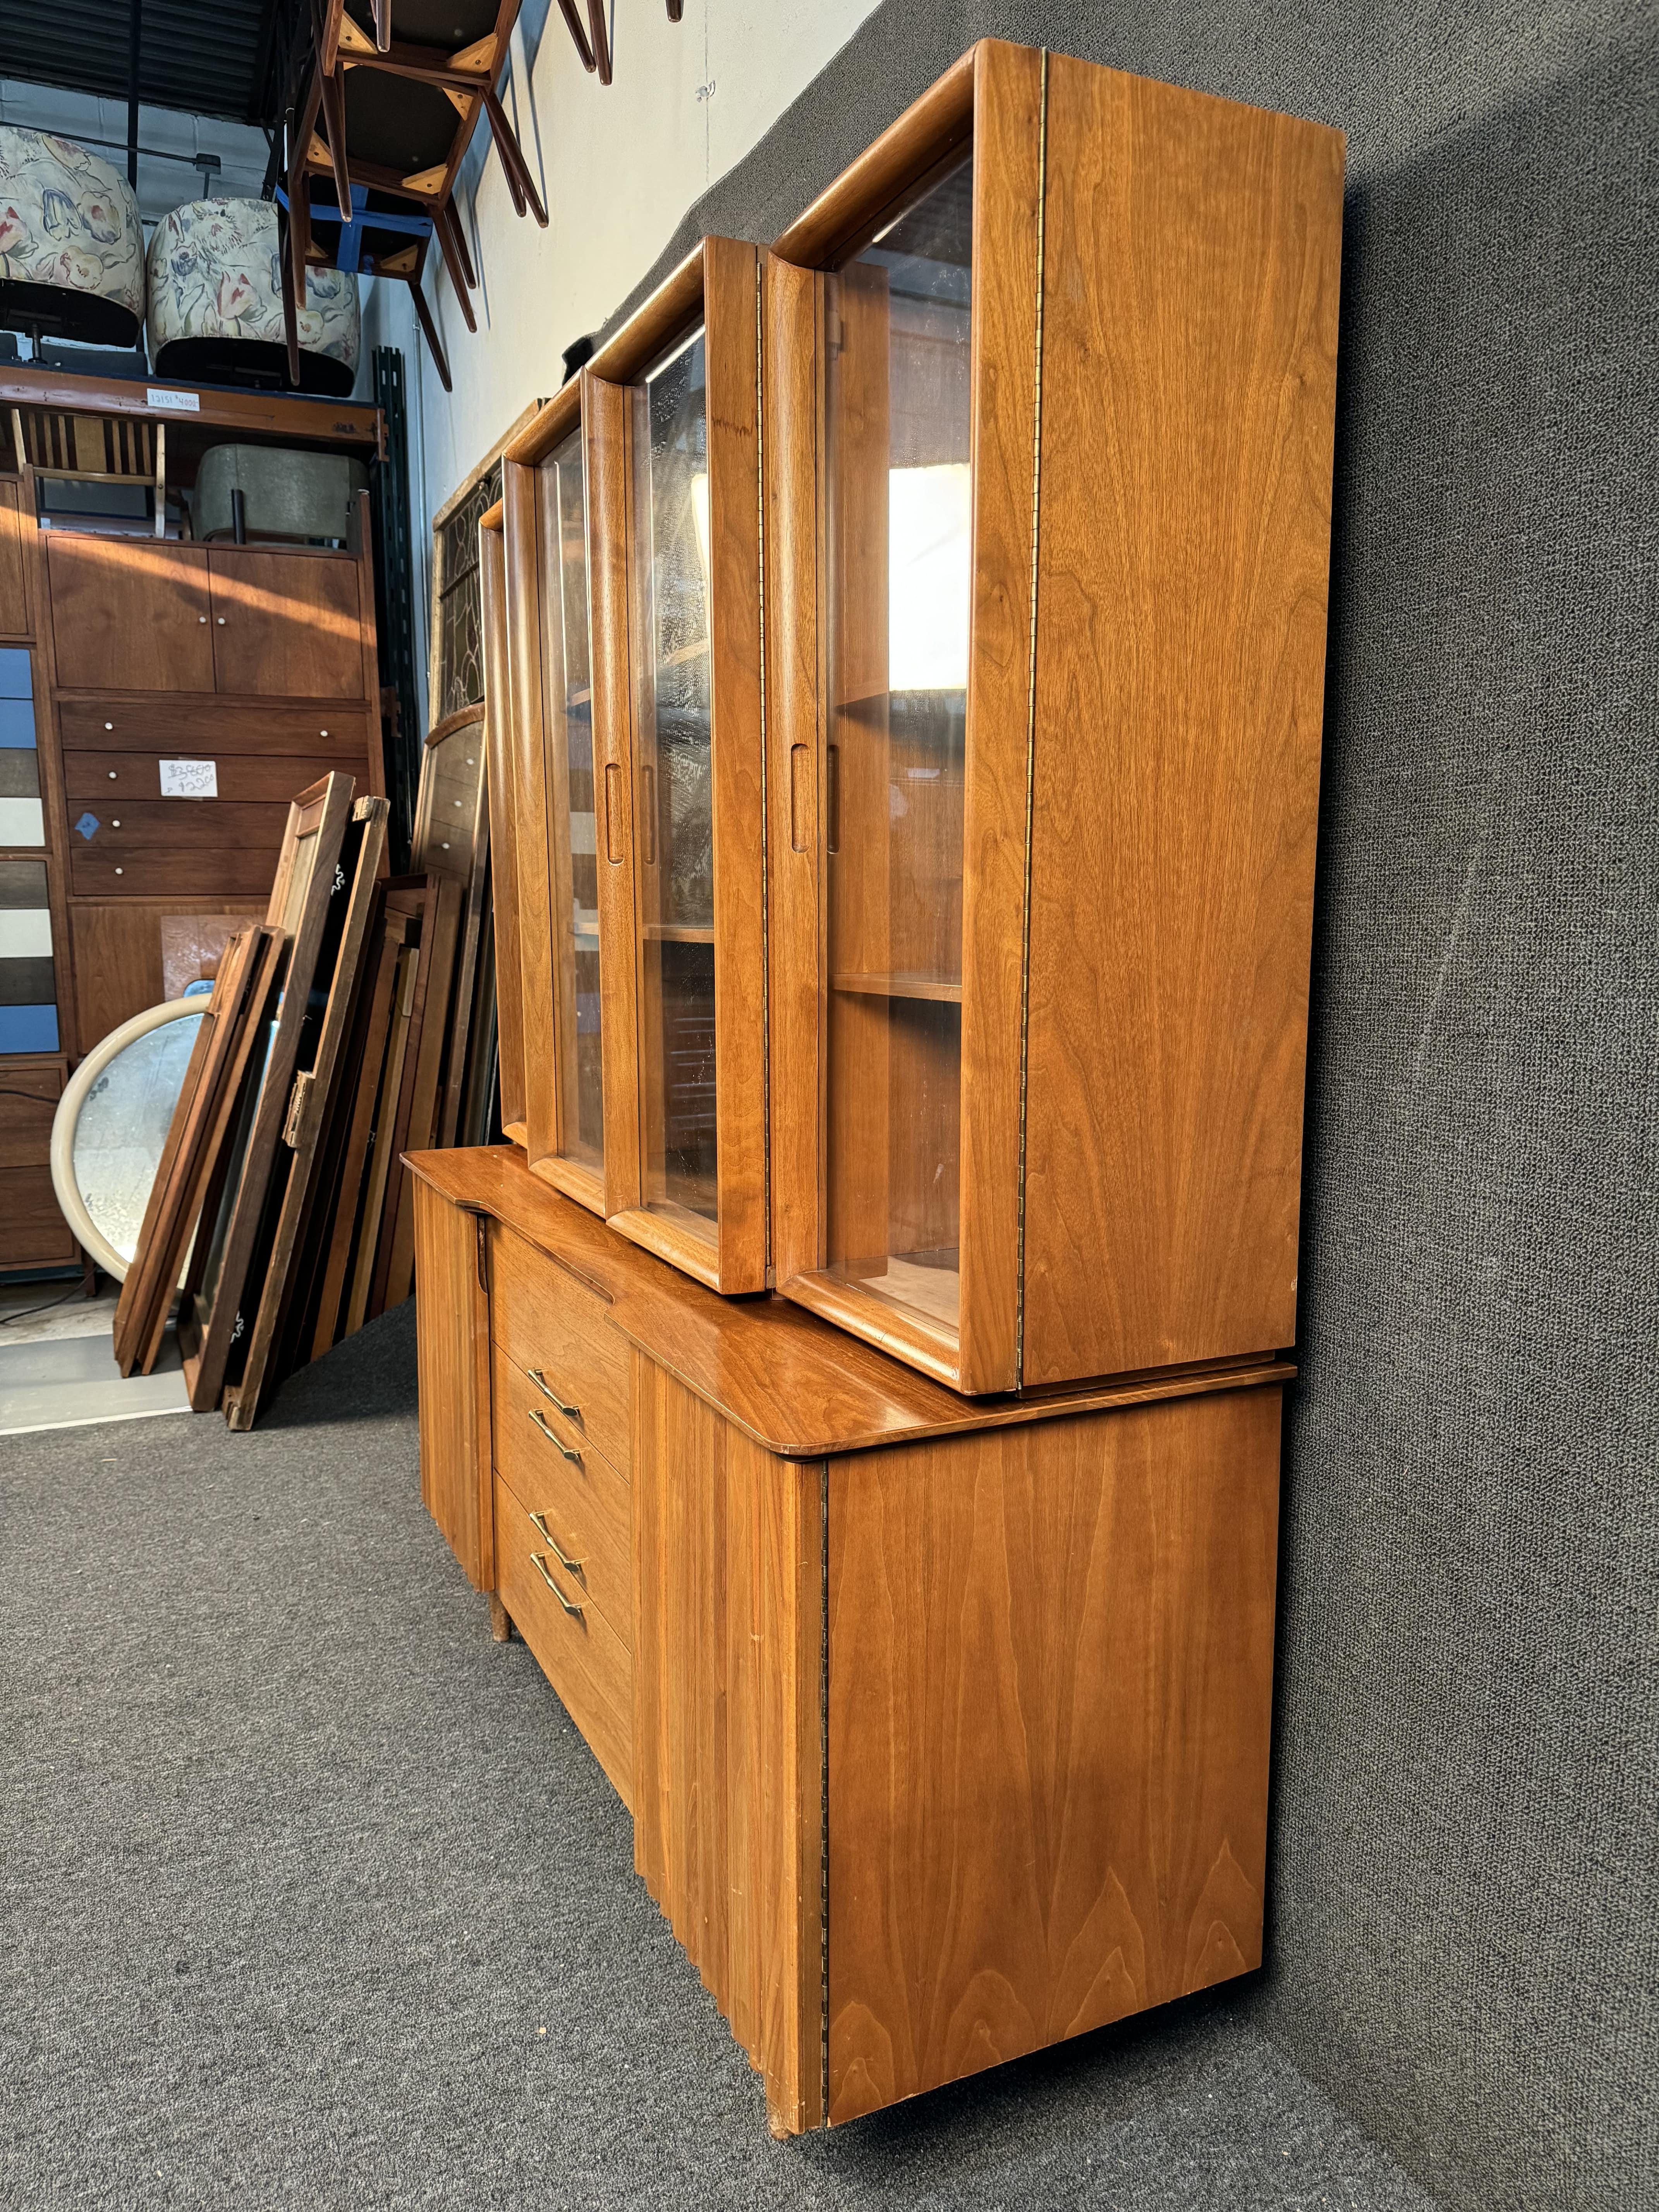 Young Manufacturing Mid-Century Walnut Sideboard Credenza Buffet and Hutch. This item features stylish metal door pulls and heaps of storage space. Please confirm item pickup location (BK or NJ) with seller.